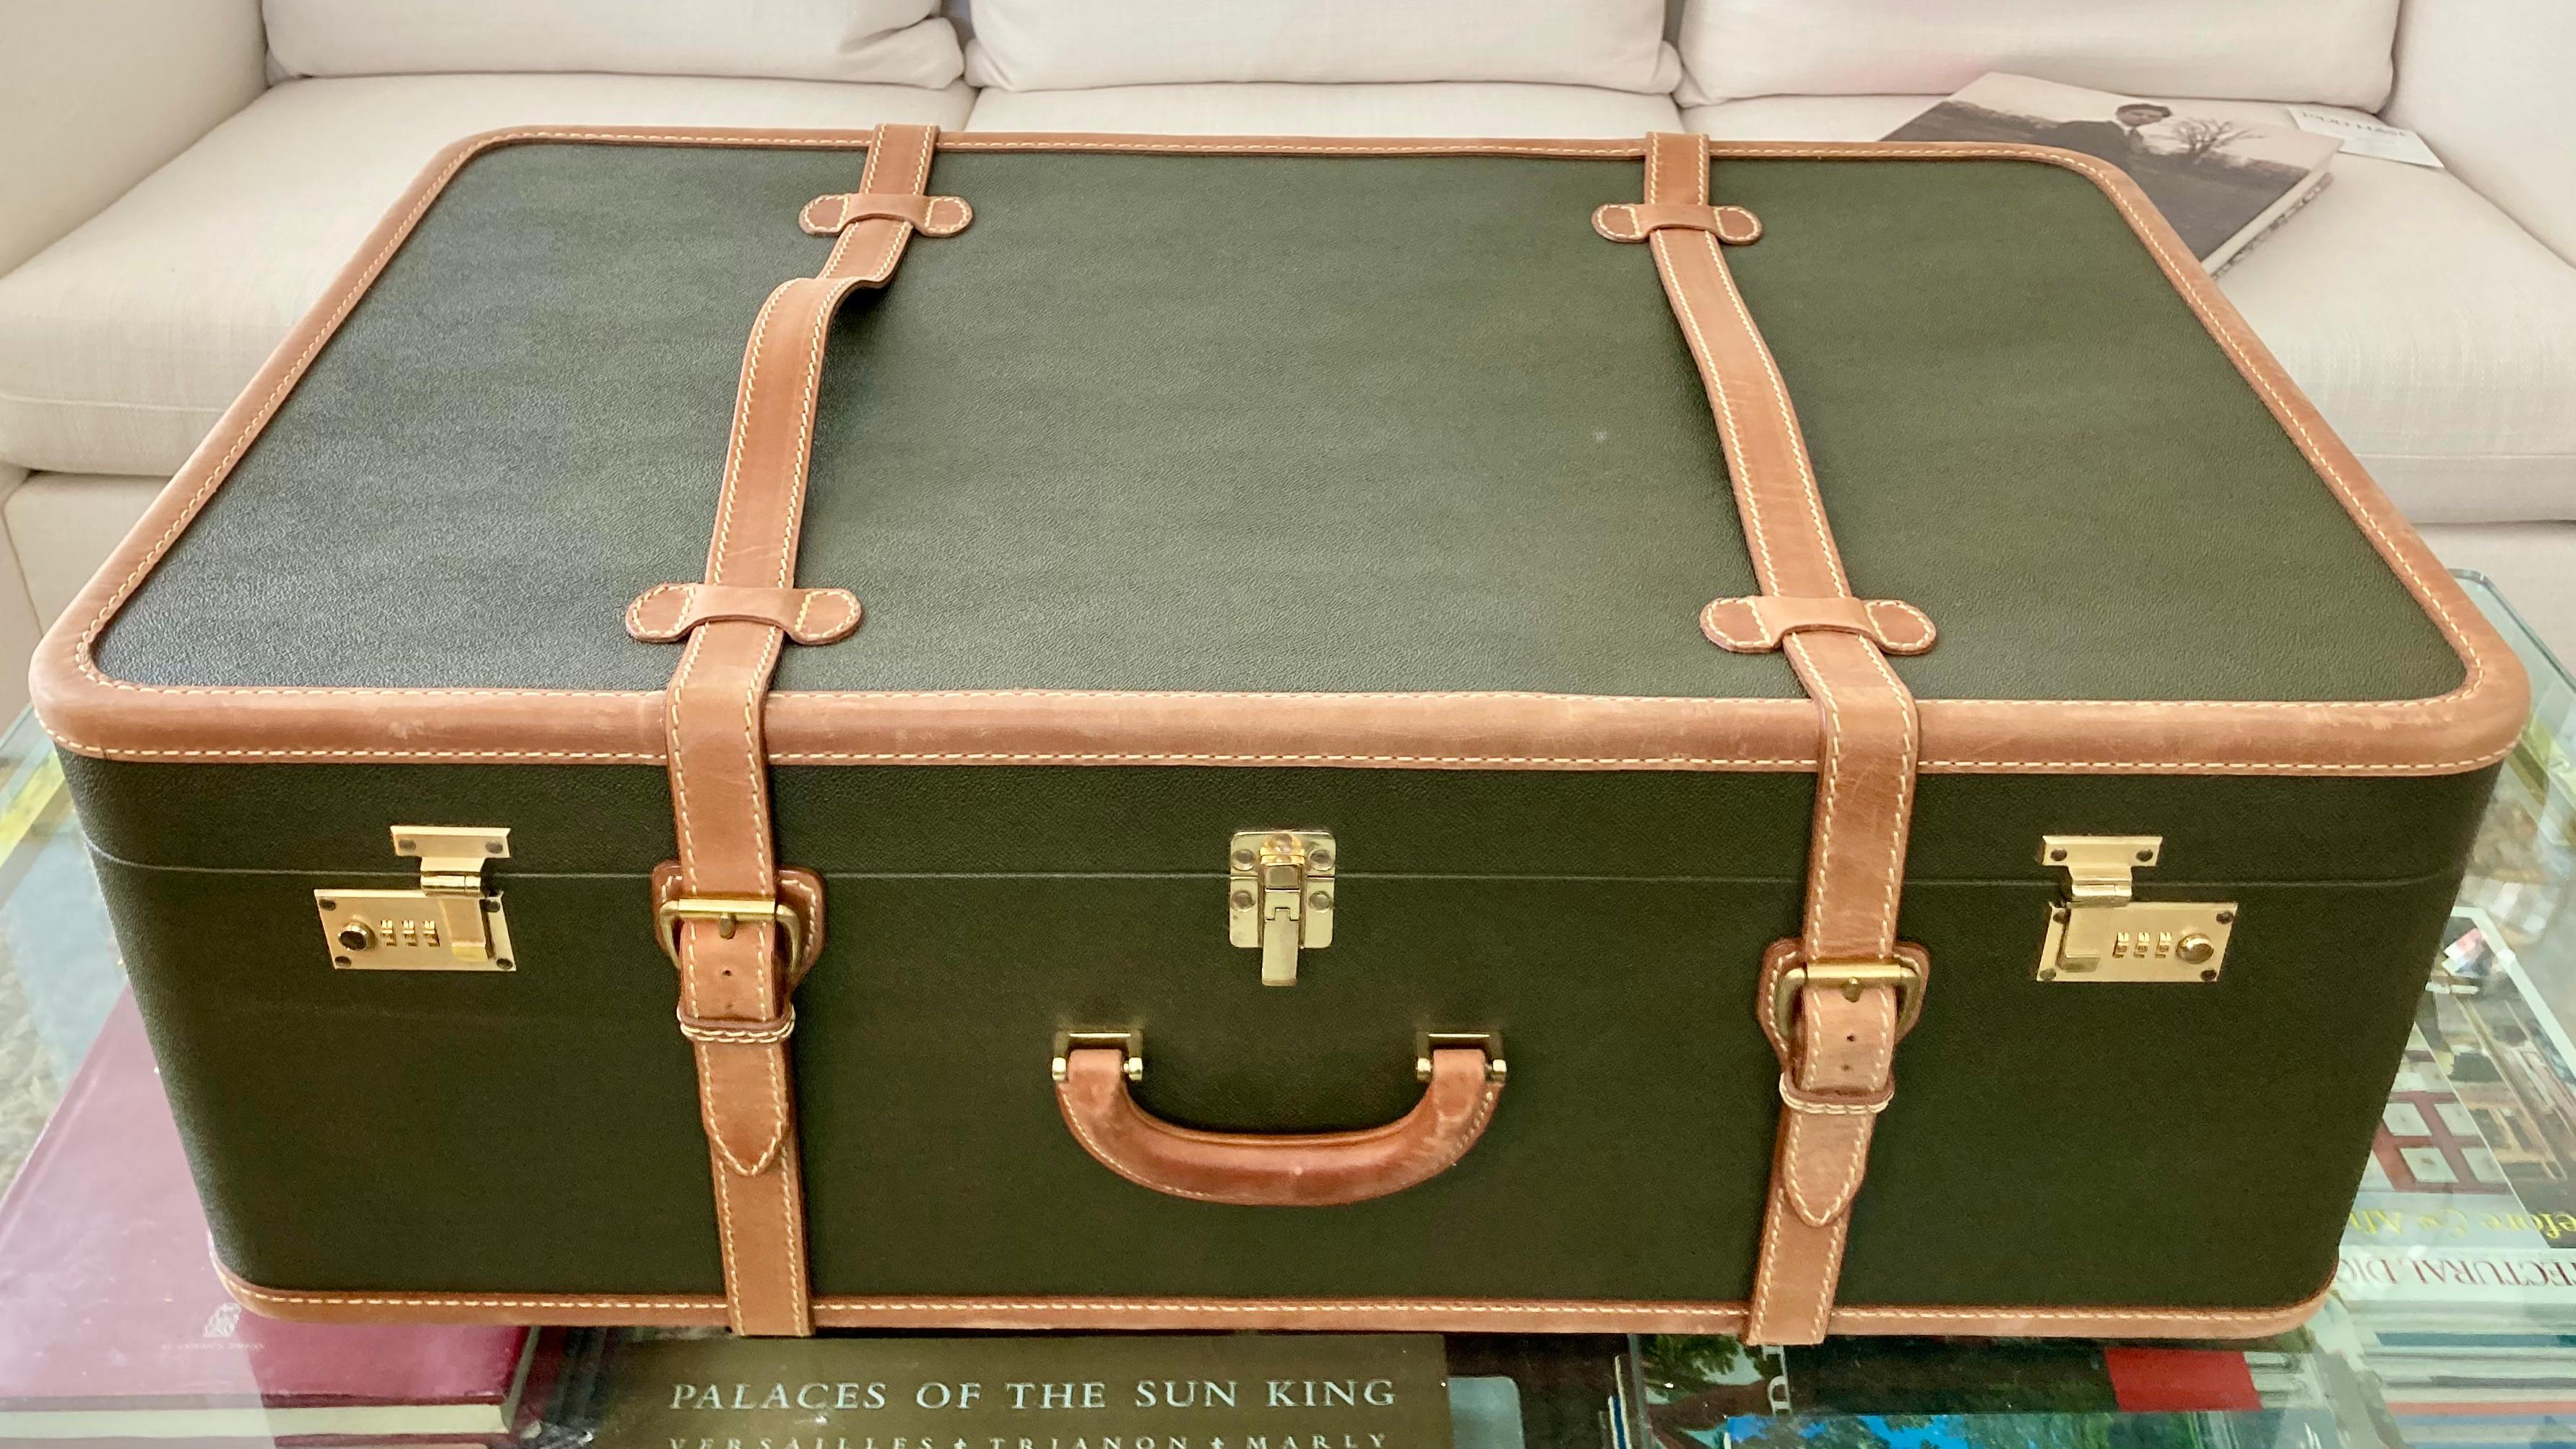 Beautiful Mulholland Brothers travel trunk with casters. Does not appear to have ever been used. Casters are all perfect and still in original bag! An amazing trunk and should be used as a travel trunk. Travel in style!